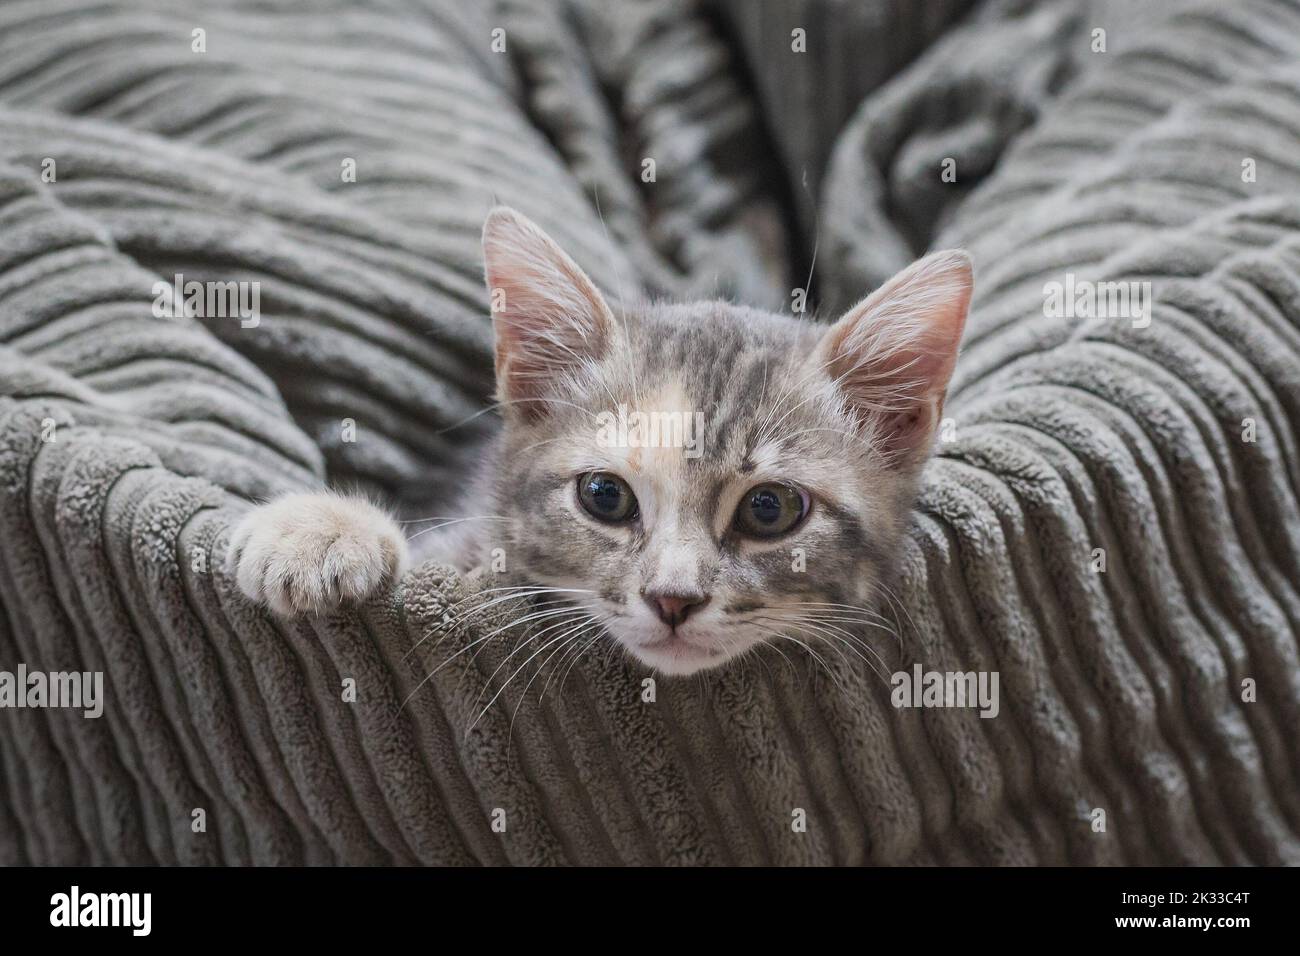 Small kitten resting on the sofa with eyes on camera Stock Photo